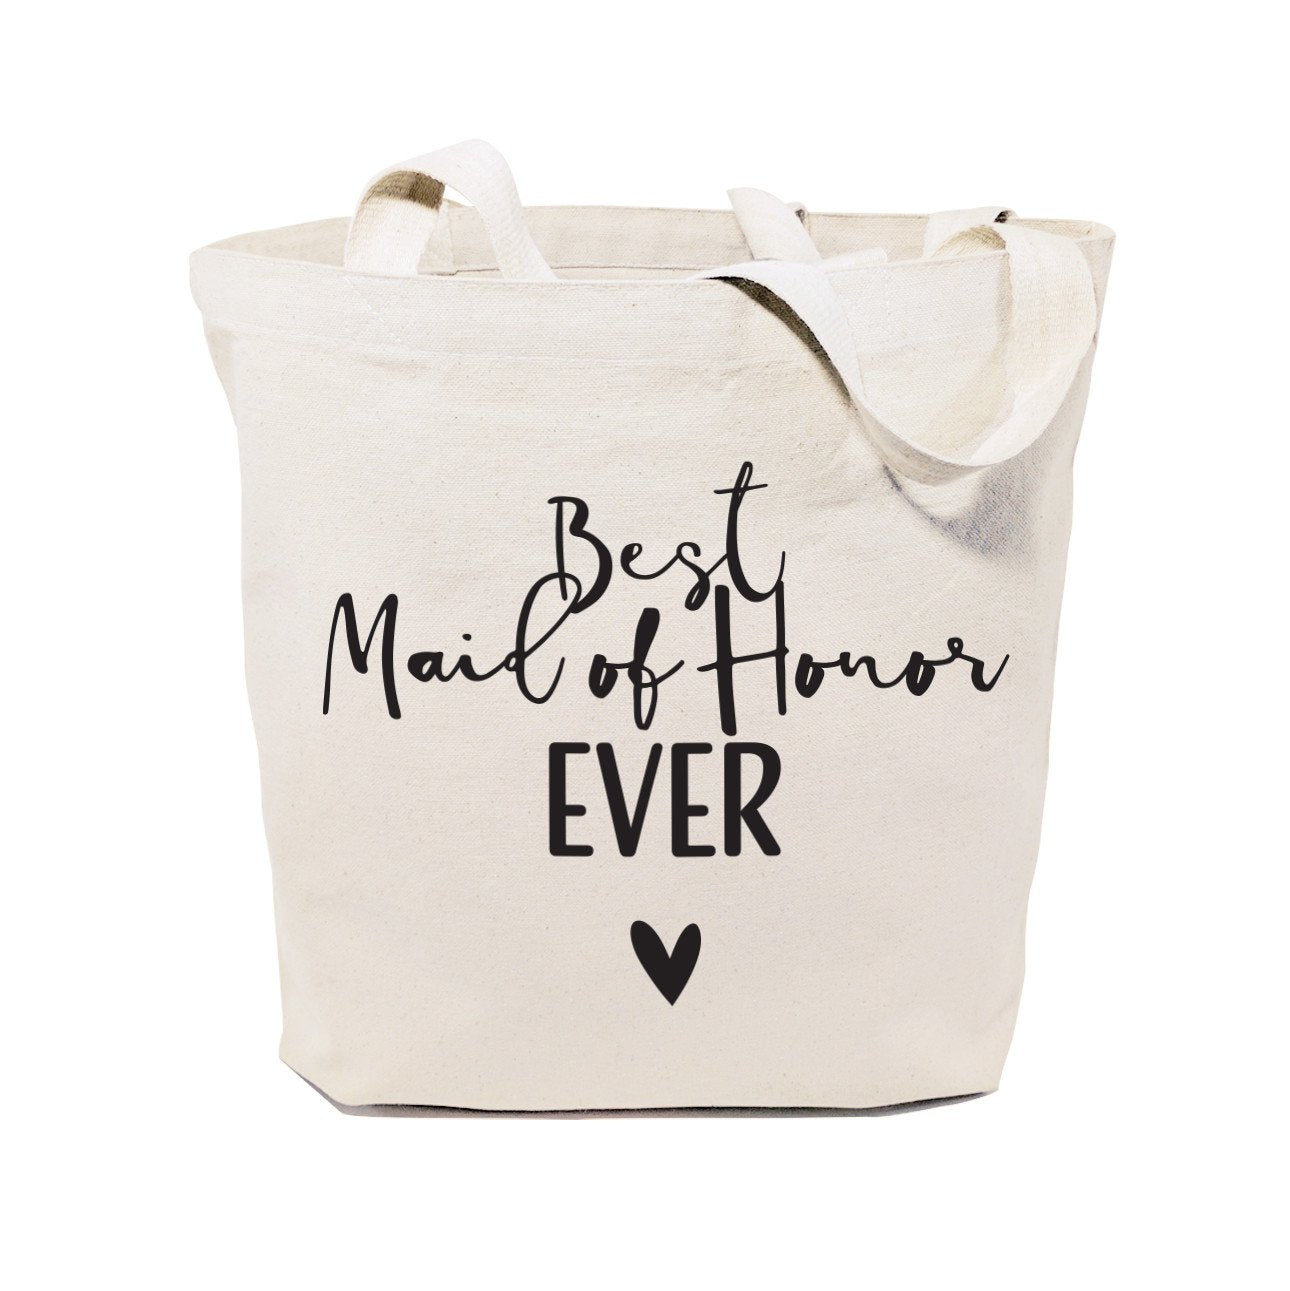 Best Maid of Honor Ever Wedding Cotton Canvas Tote Bag